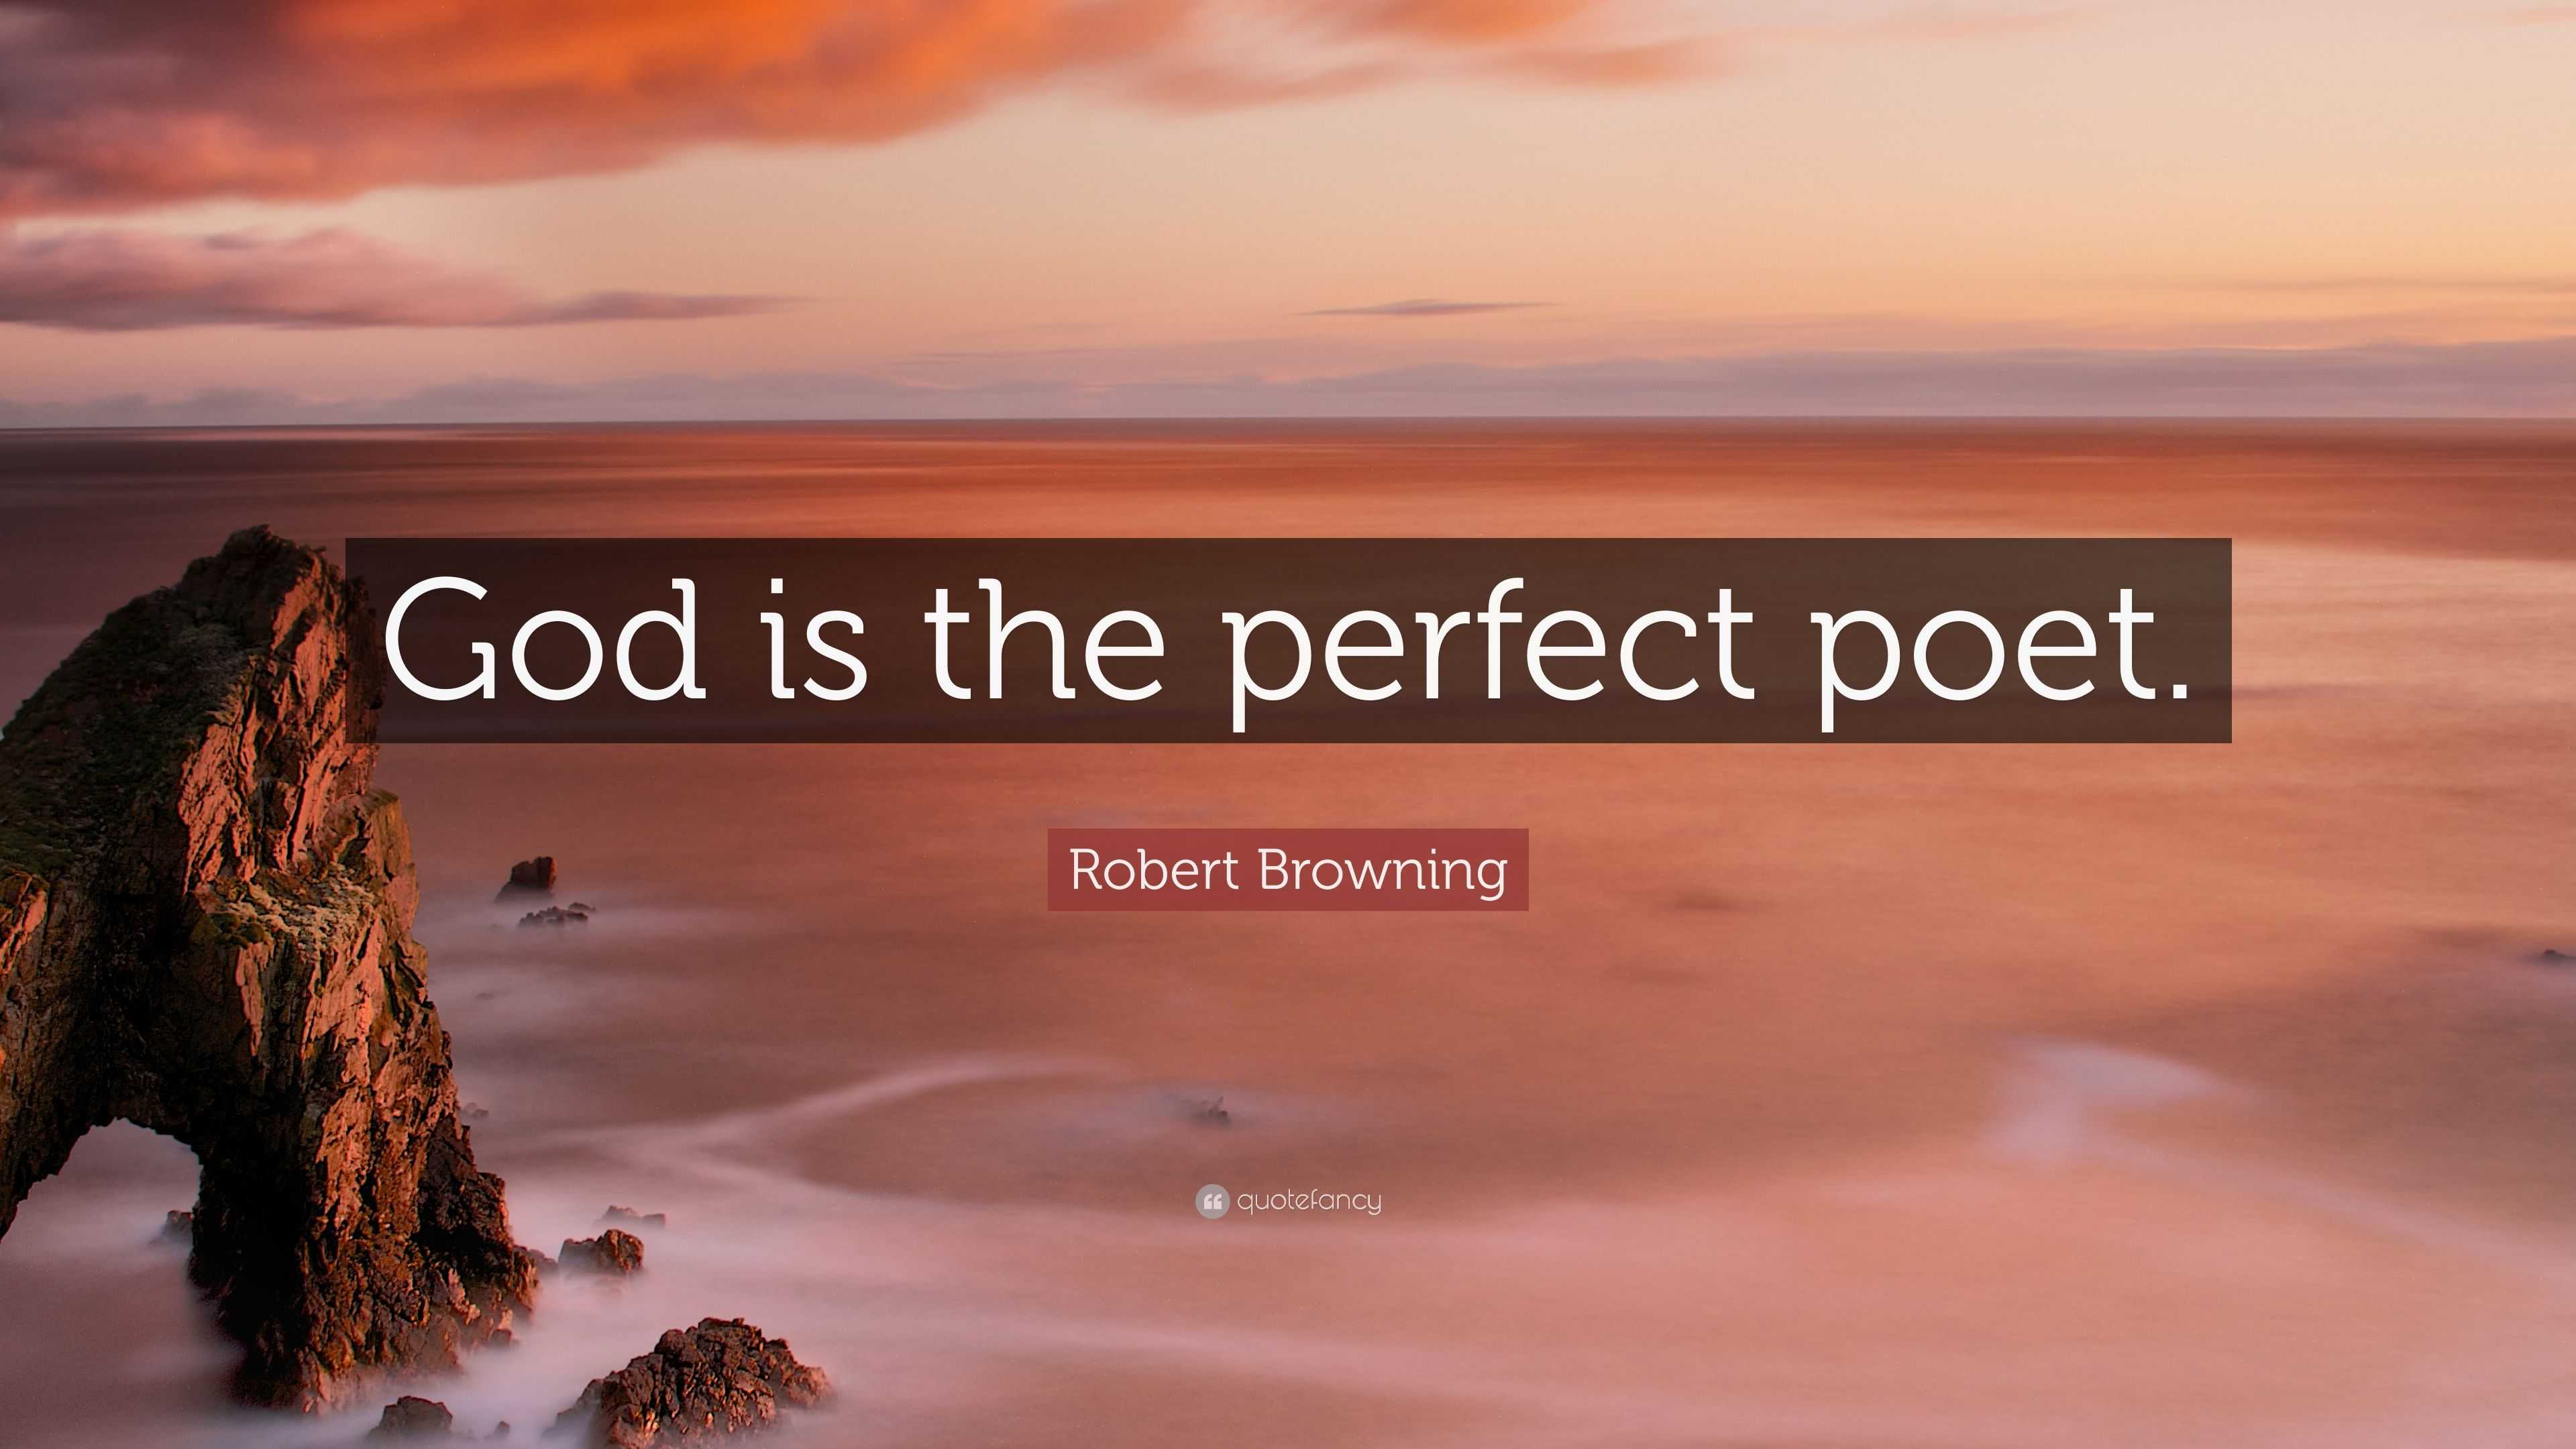 Robert Browning Quote: “God is the perfect poet.”